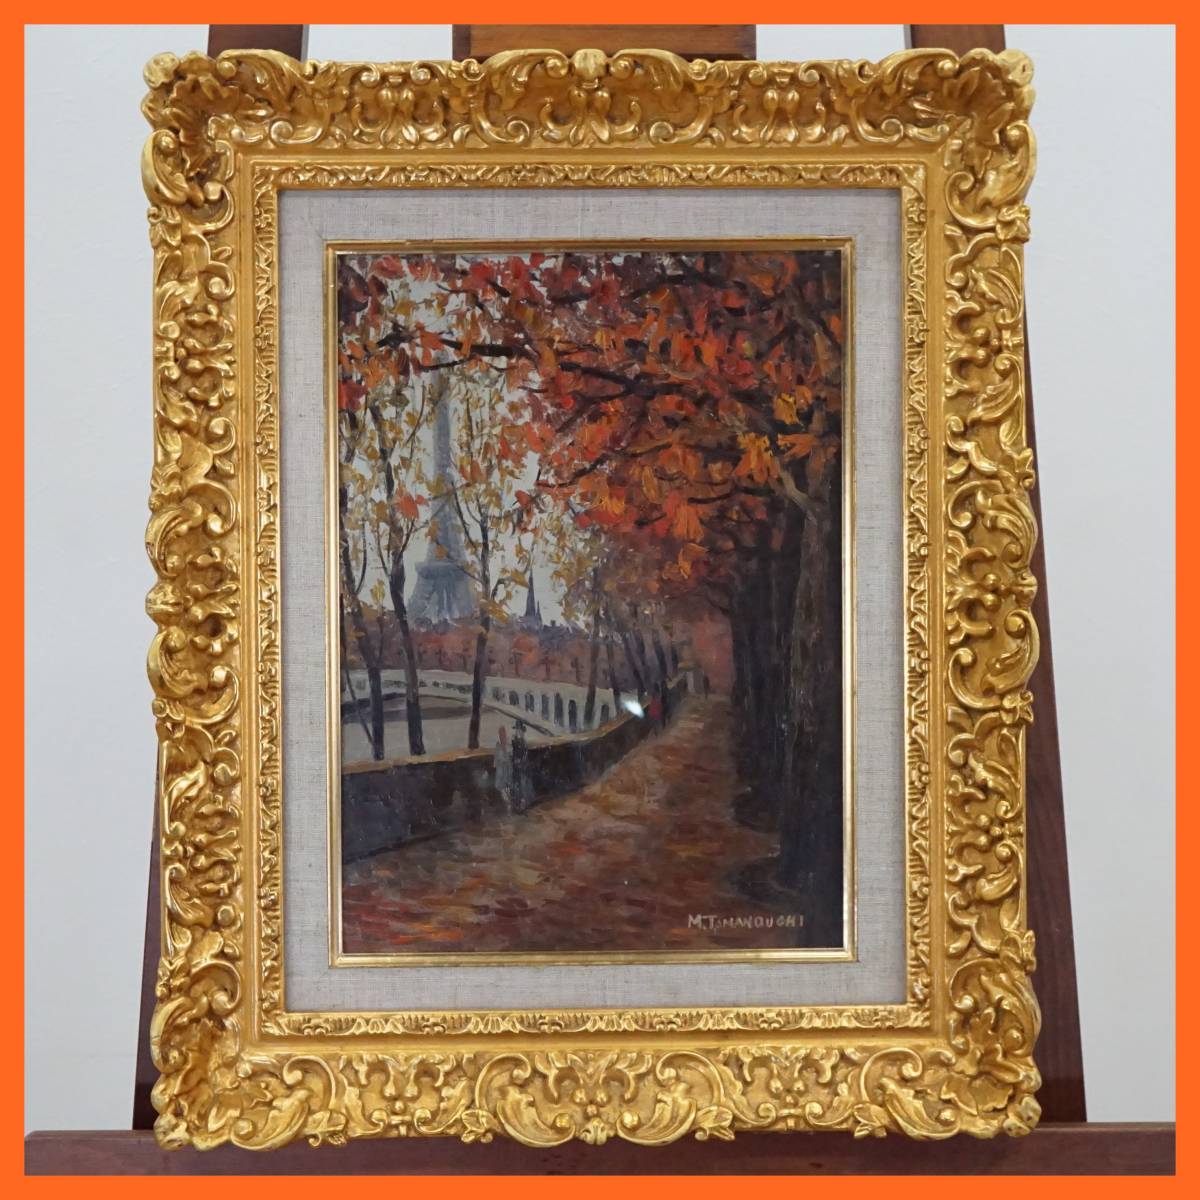 Previous edition: [Oil painting] Authentic Mitsuo Tamanouchi Marronnier tree-lined street near Paris Concorde No. 4 F Frame size approx. 49.5 cm x 40.5 cm Painting Oil painting ★Free shipping★, painting, oil painting, Nature, Landscape painting